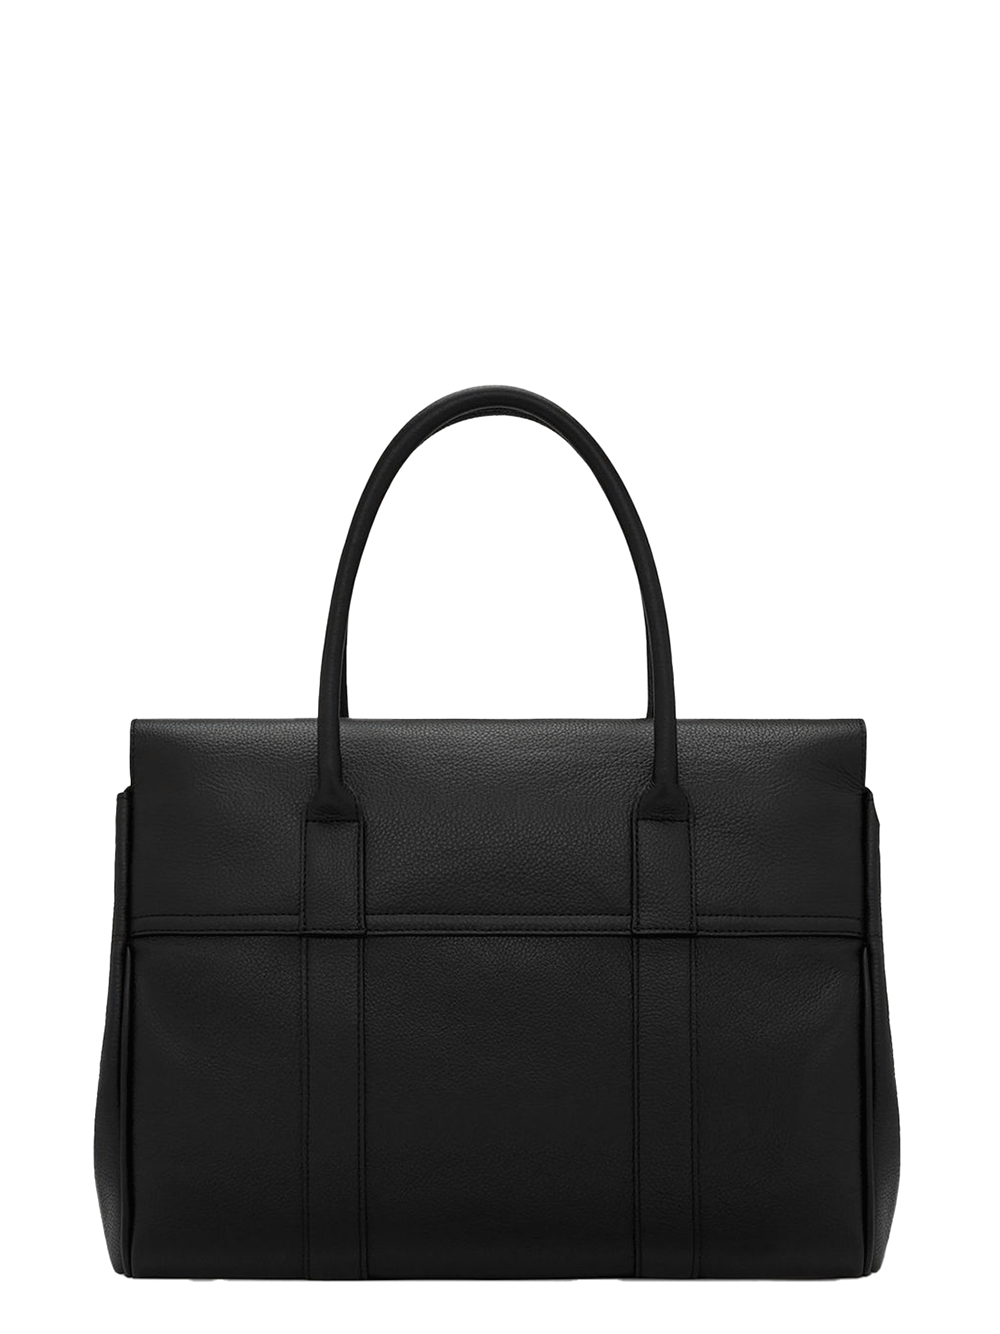 Mulberry-Bayswater-Small-Classic-Grain-Black-2